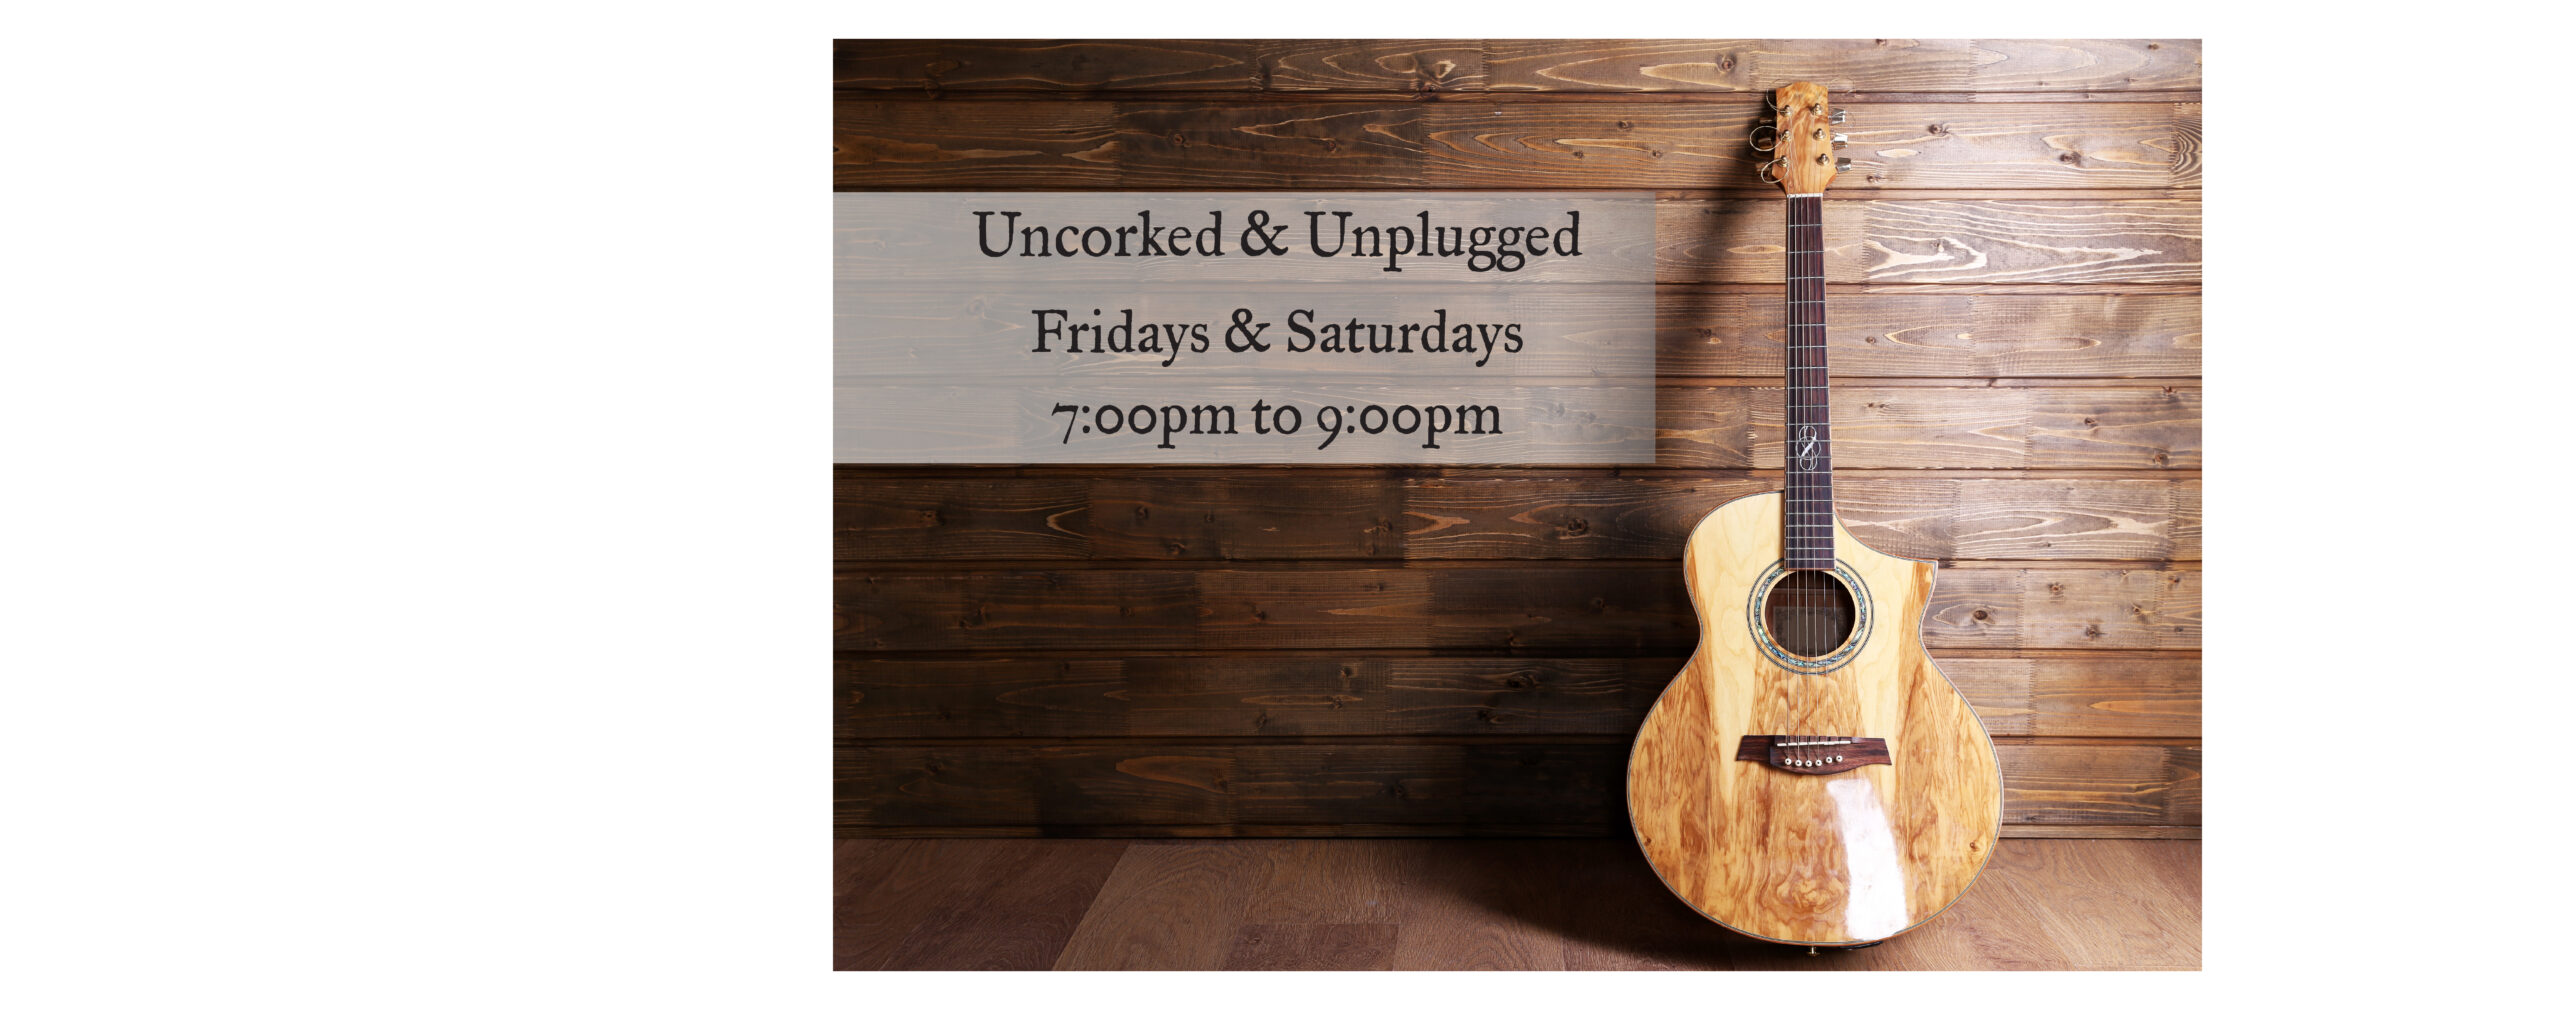 Live Music Fridays & Saturdays from 7pm to 9pm at Blend in Bozeman